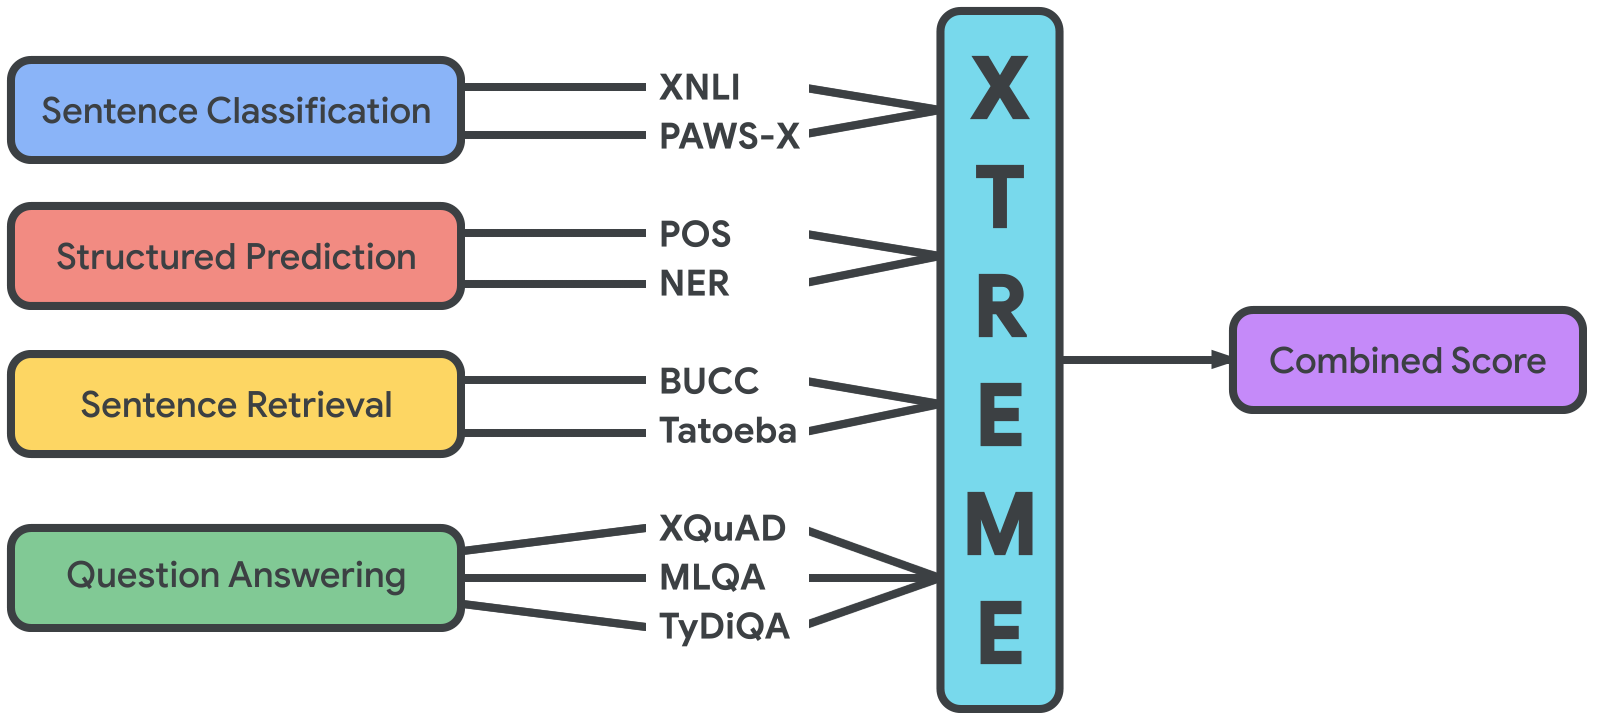 The datasets used in XTREME